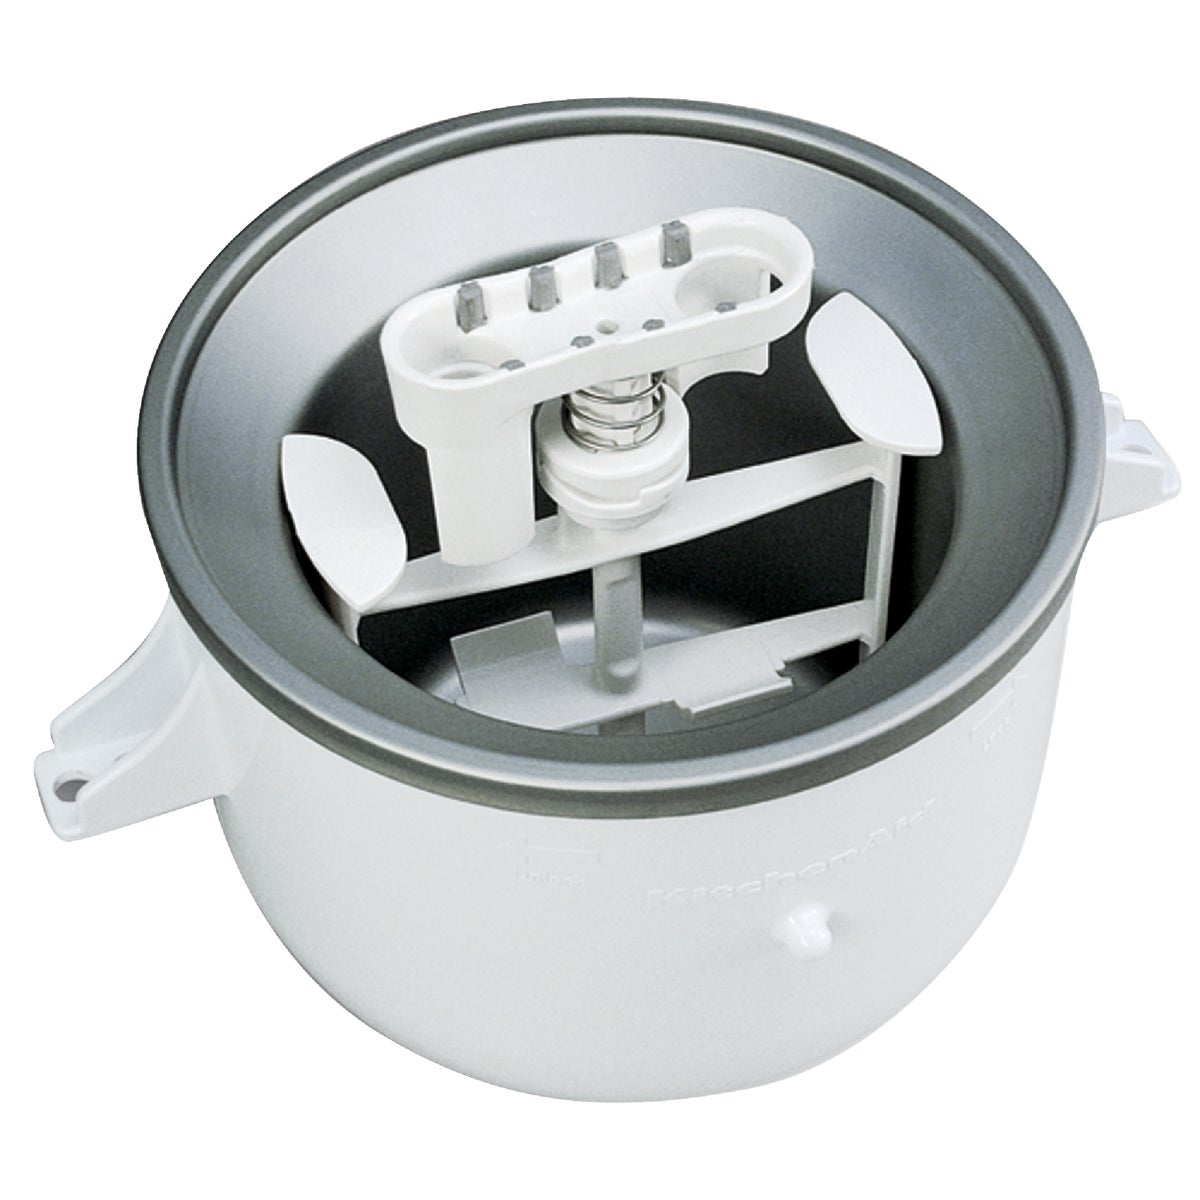 Item 650192, KitchenAid Ice Cream Attachment fits all model Stand Mixers.